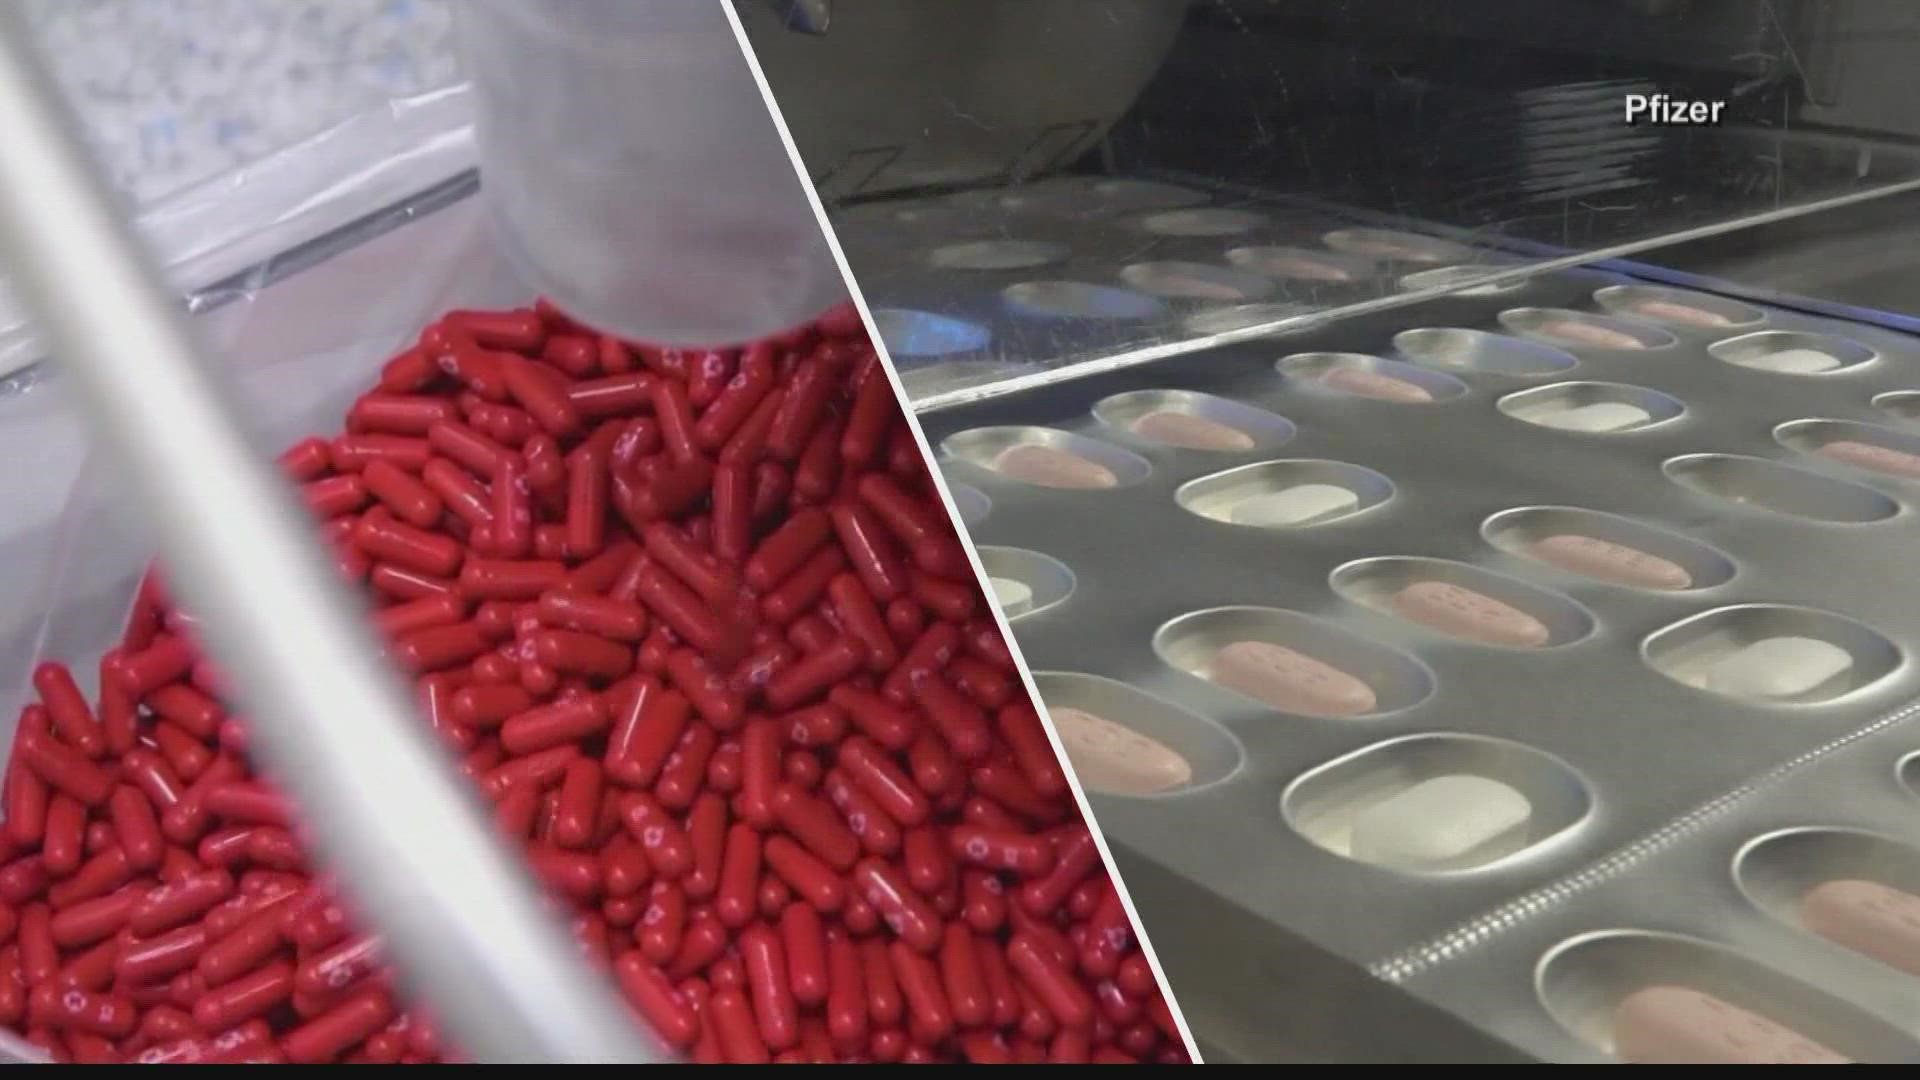 Our Lauren Kostiuk has more on the new pills.